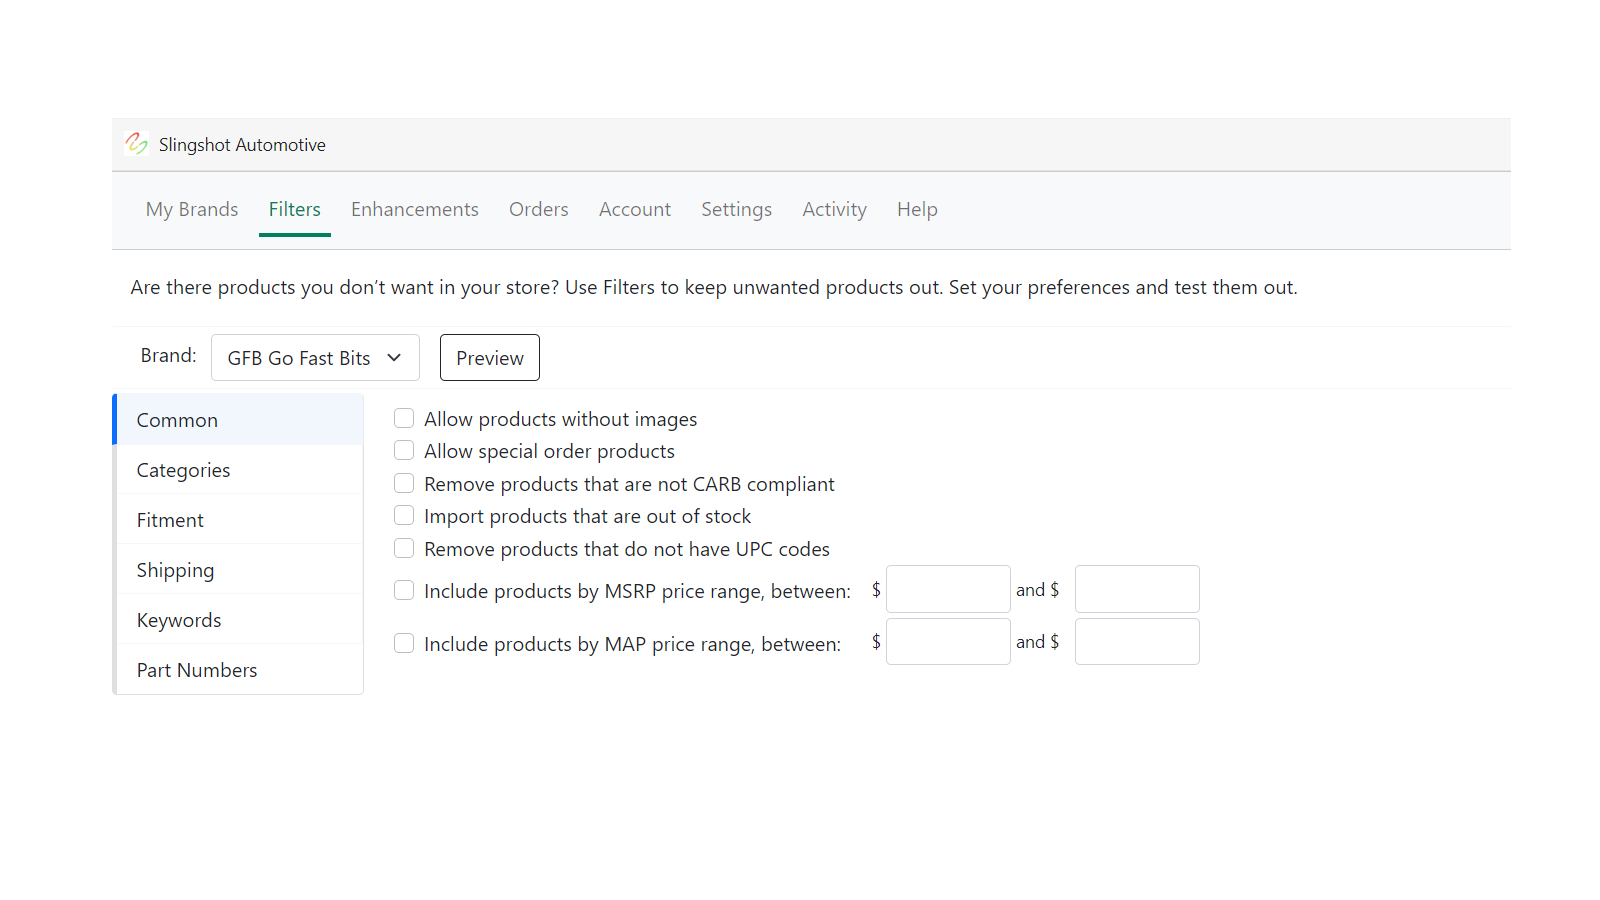 Use filters and enhancements to improve your products